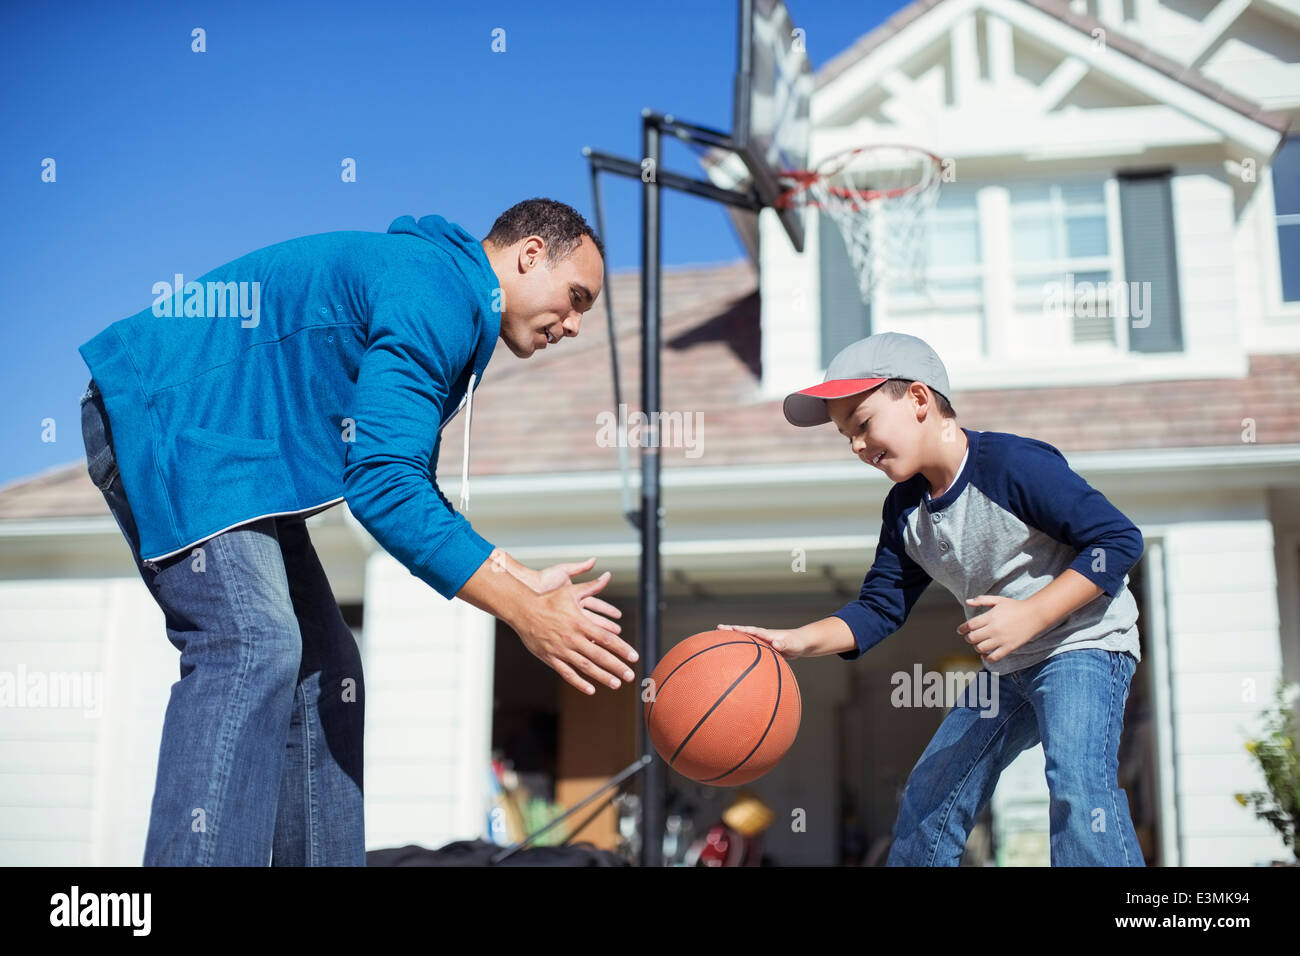 Father and son playing basketball in sunny driveway Stock Photo